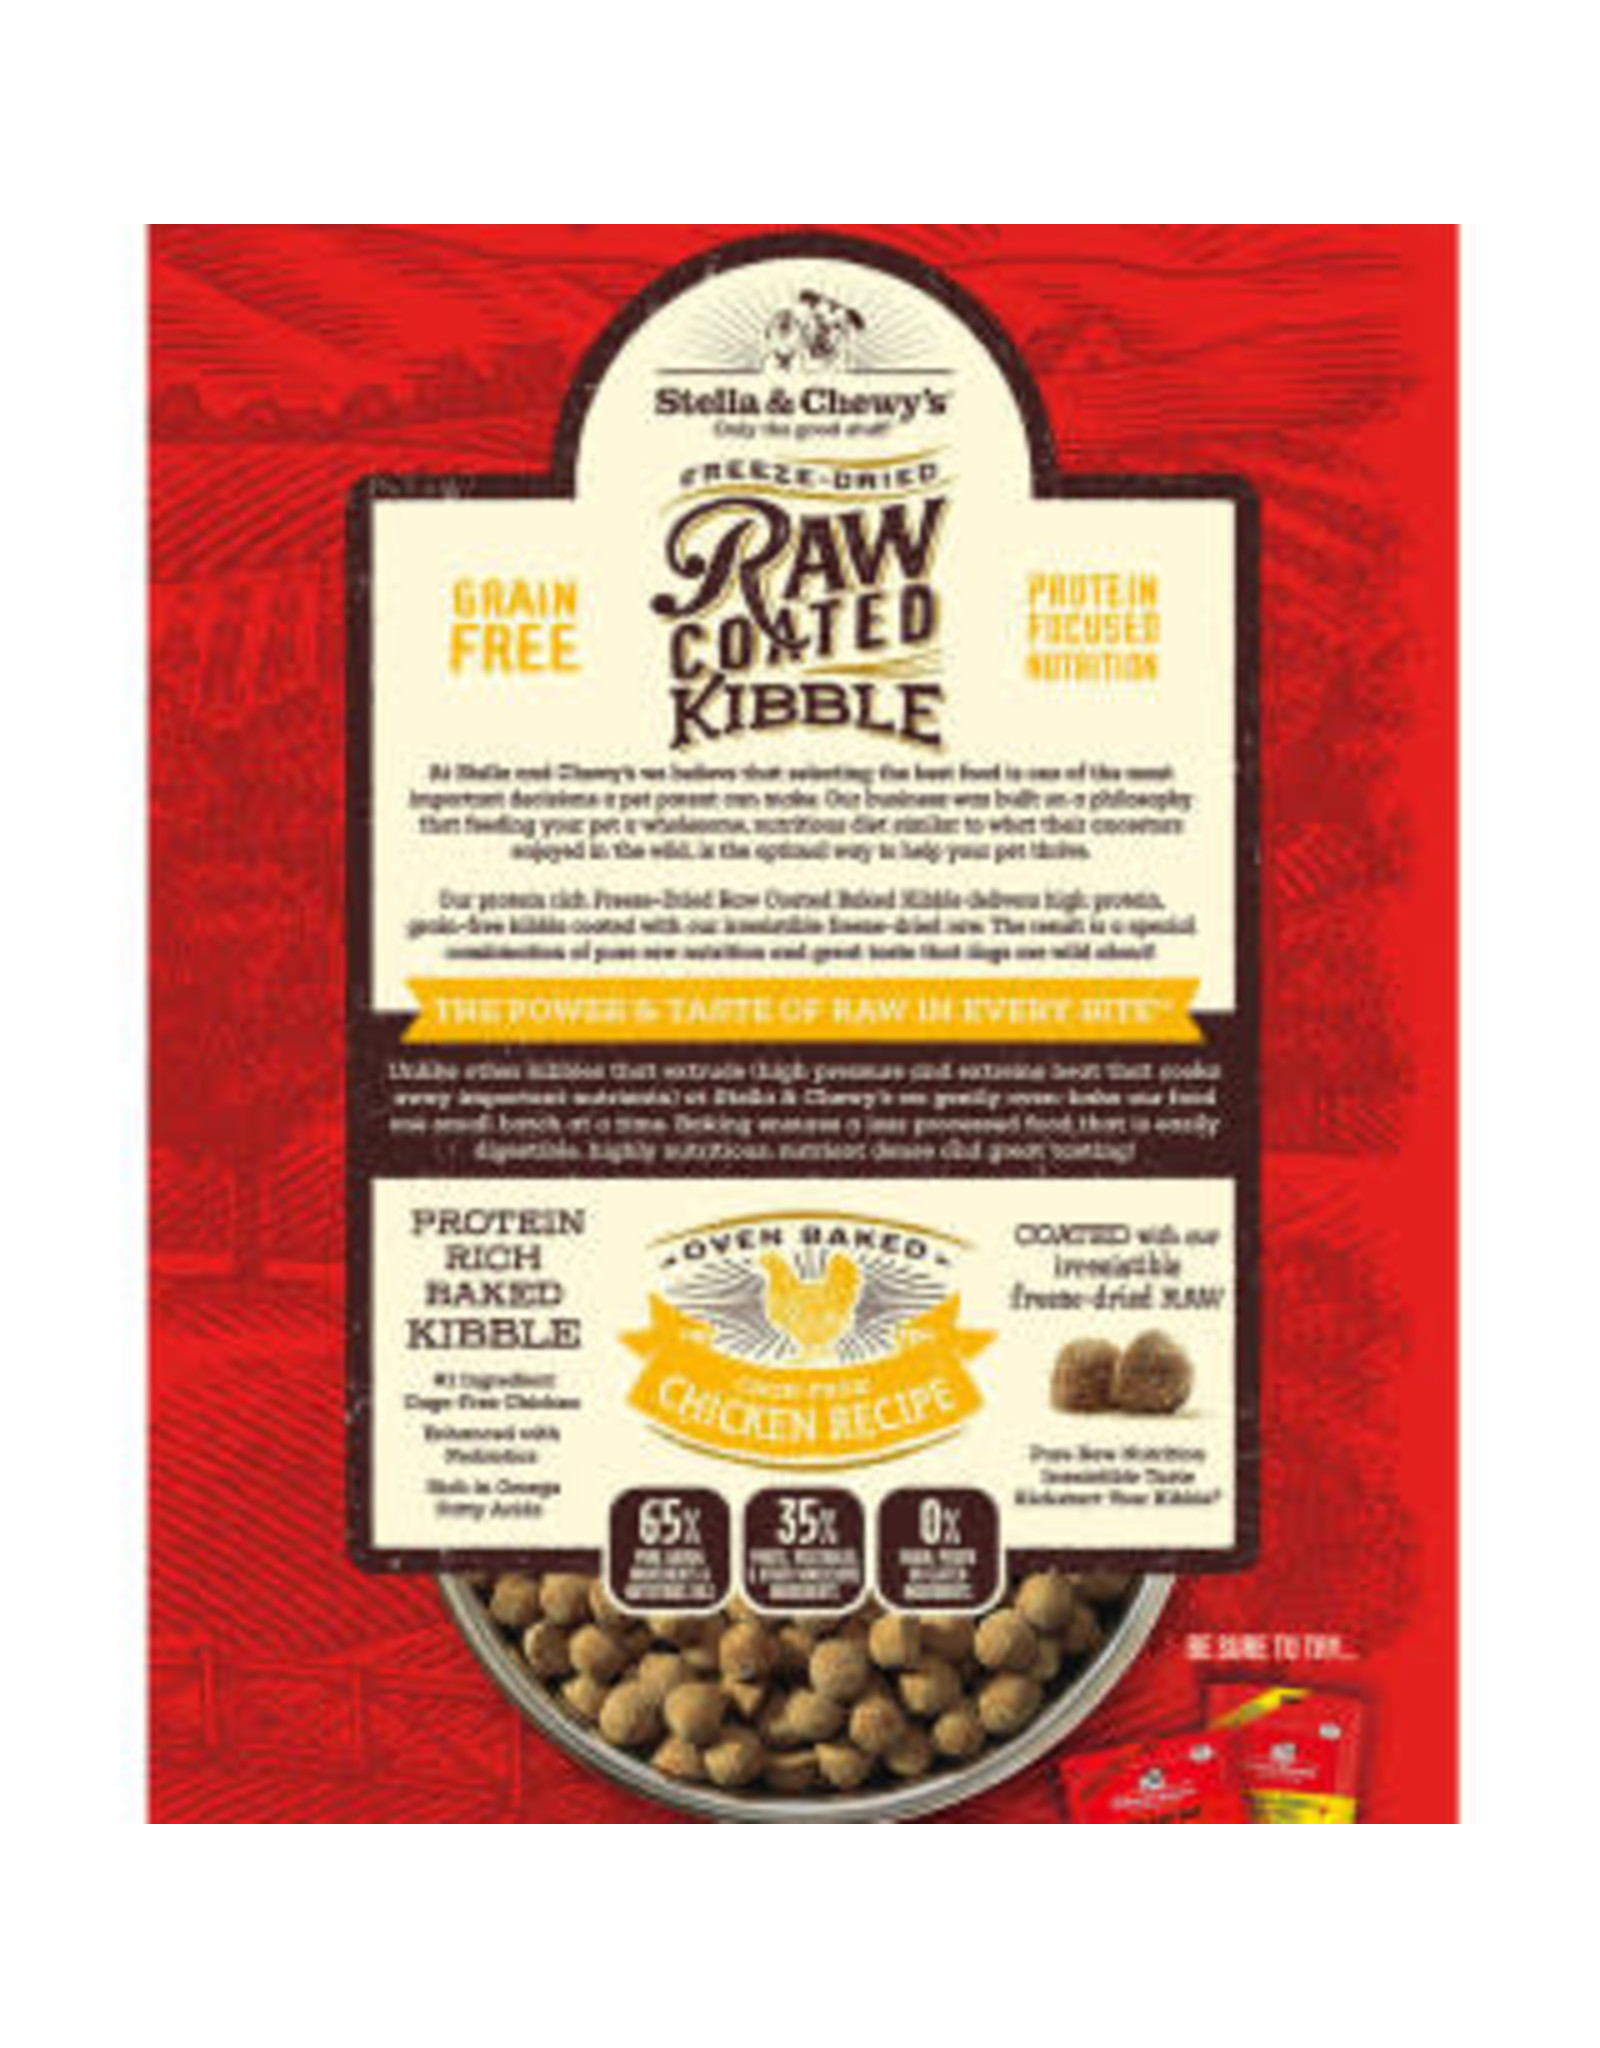 Stella & Chewy's Stella & Chewy's Raw Coated Kibble Cage-Free Chicken Recipe Dog Food